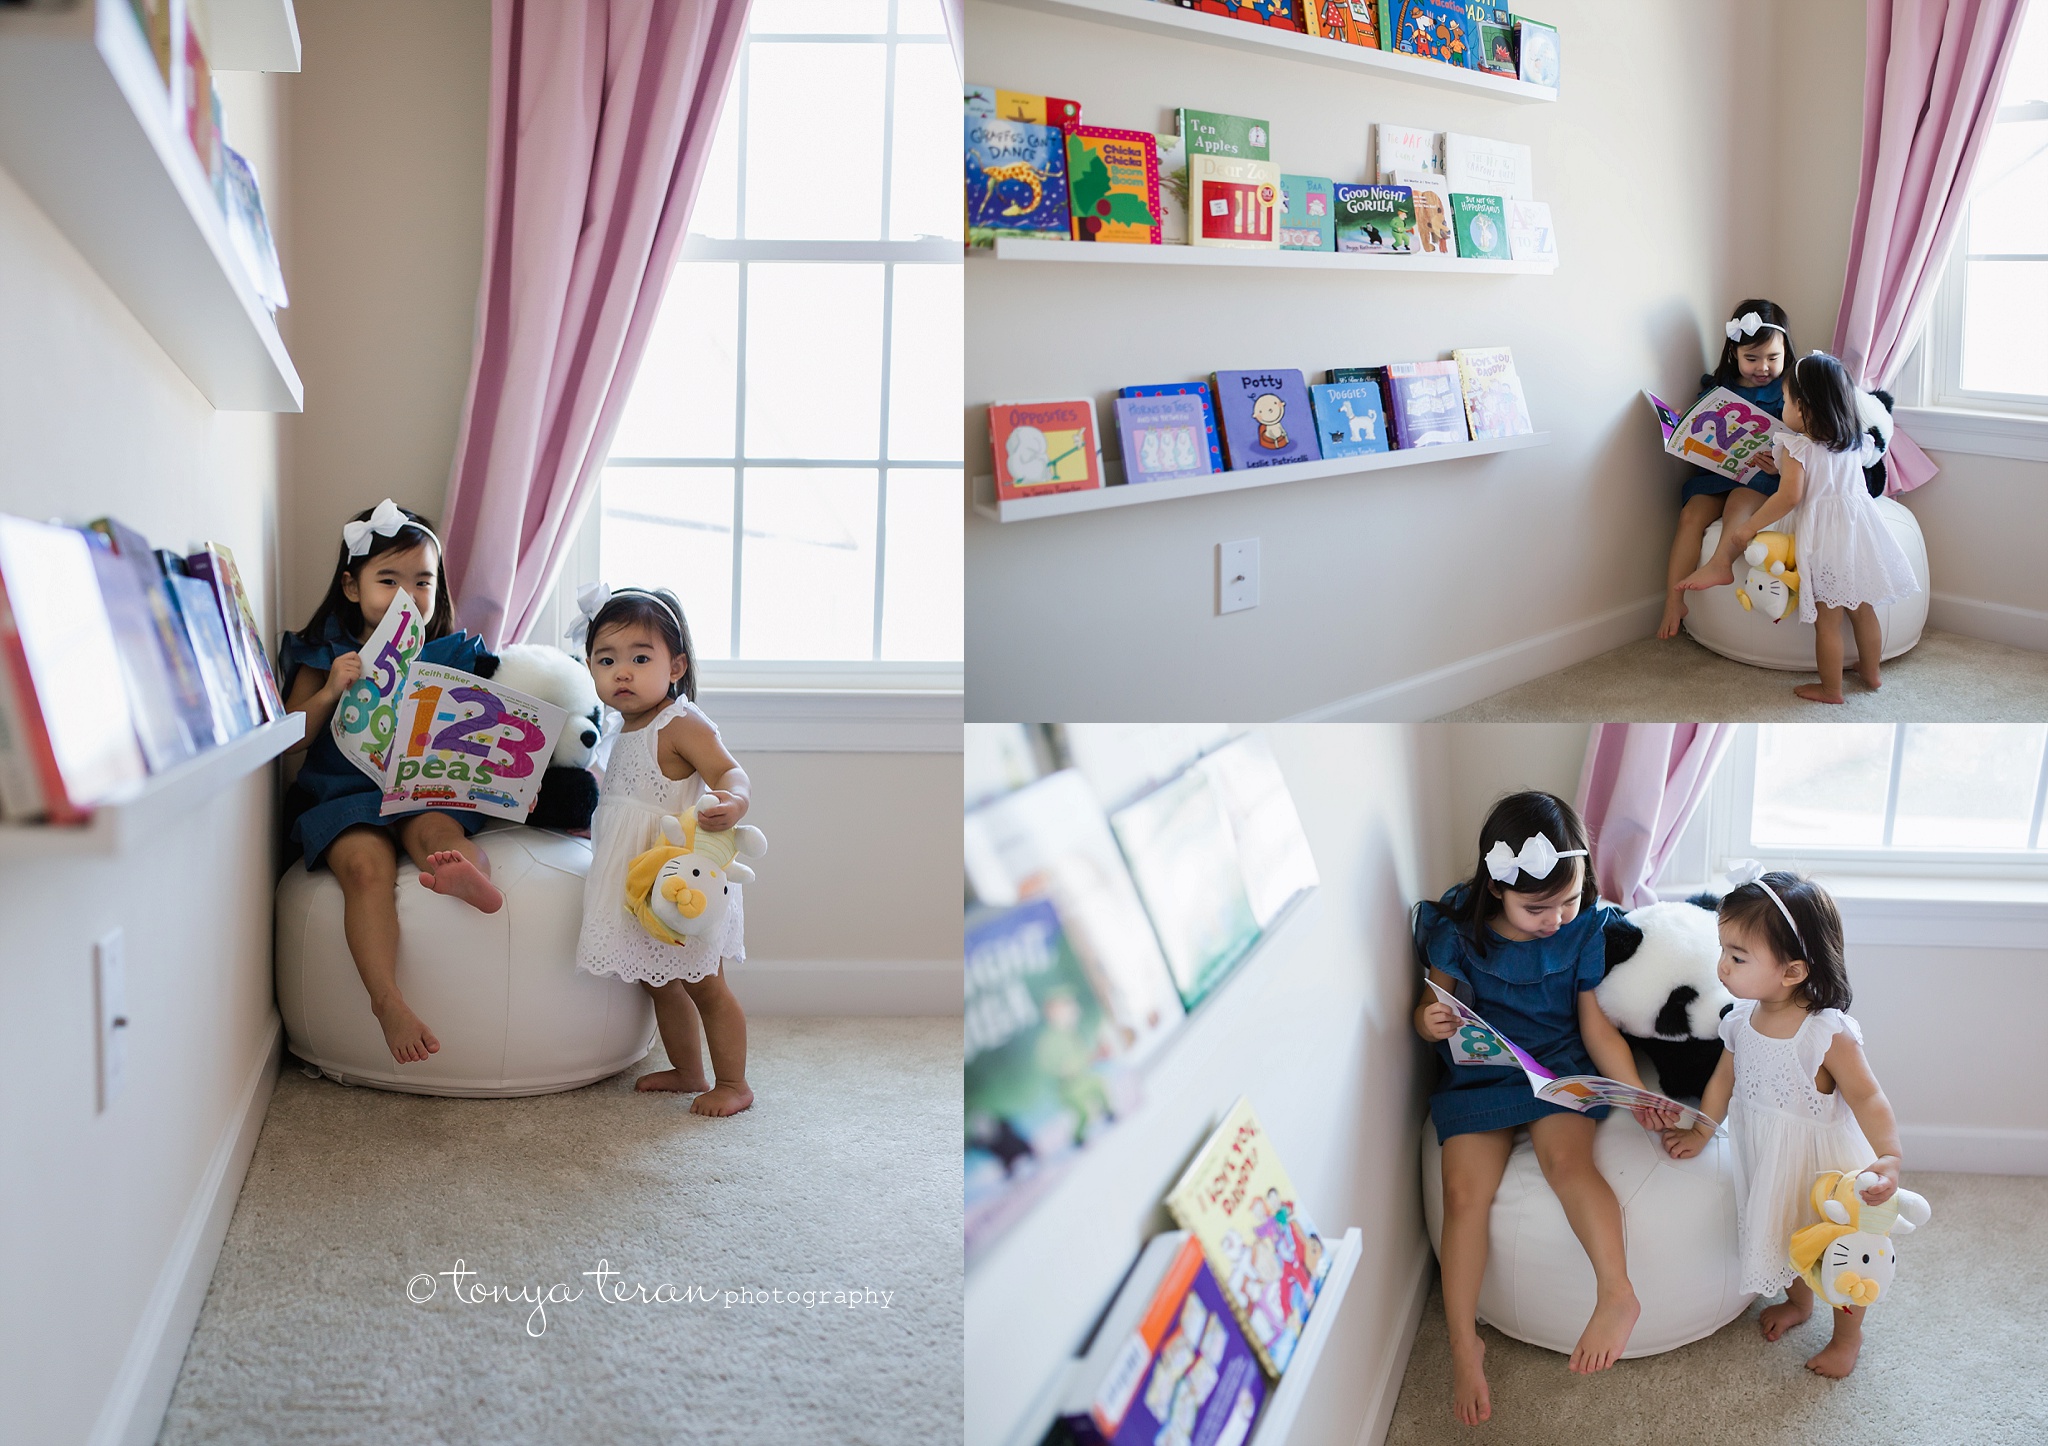 In-home Mini Family Photo Session | Tonya Teran Photography, Potomac, MD Best Newborn, Baby, and Family Photographer